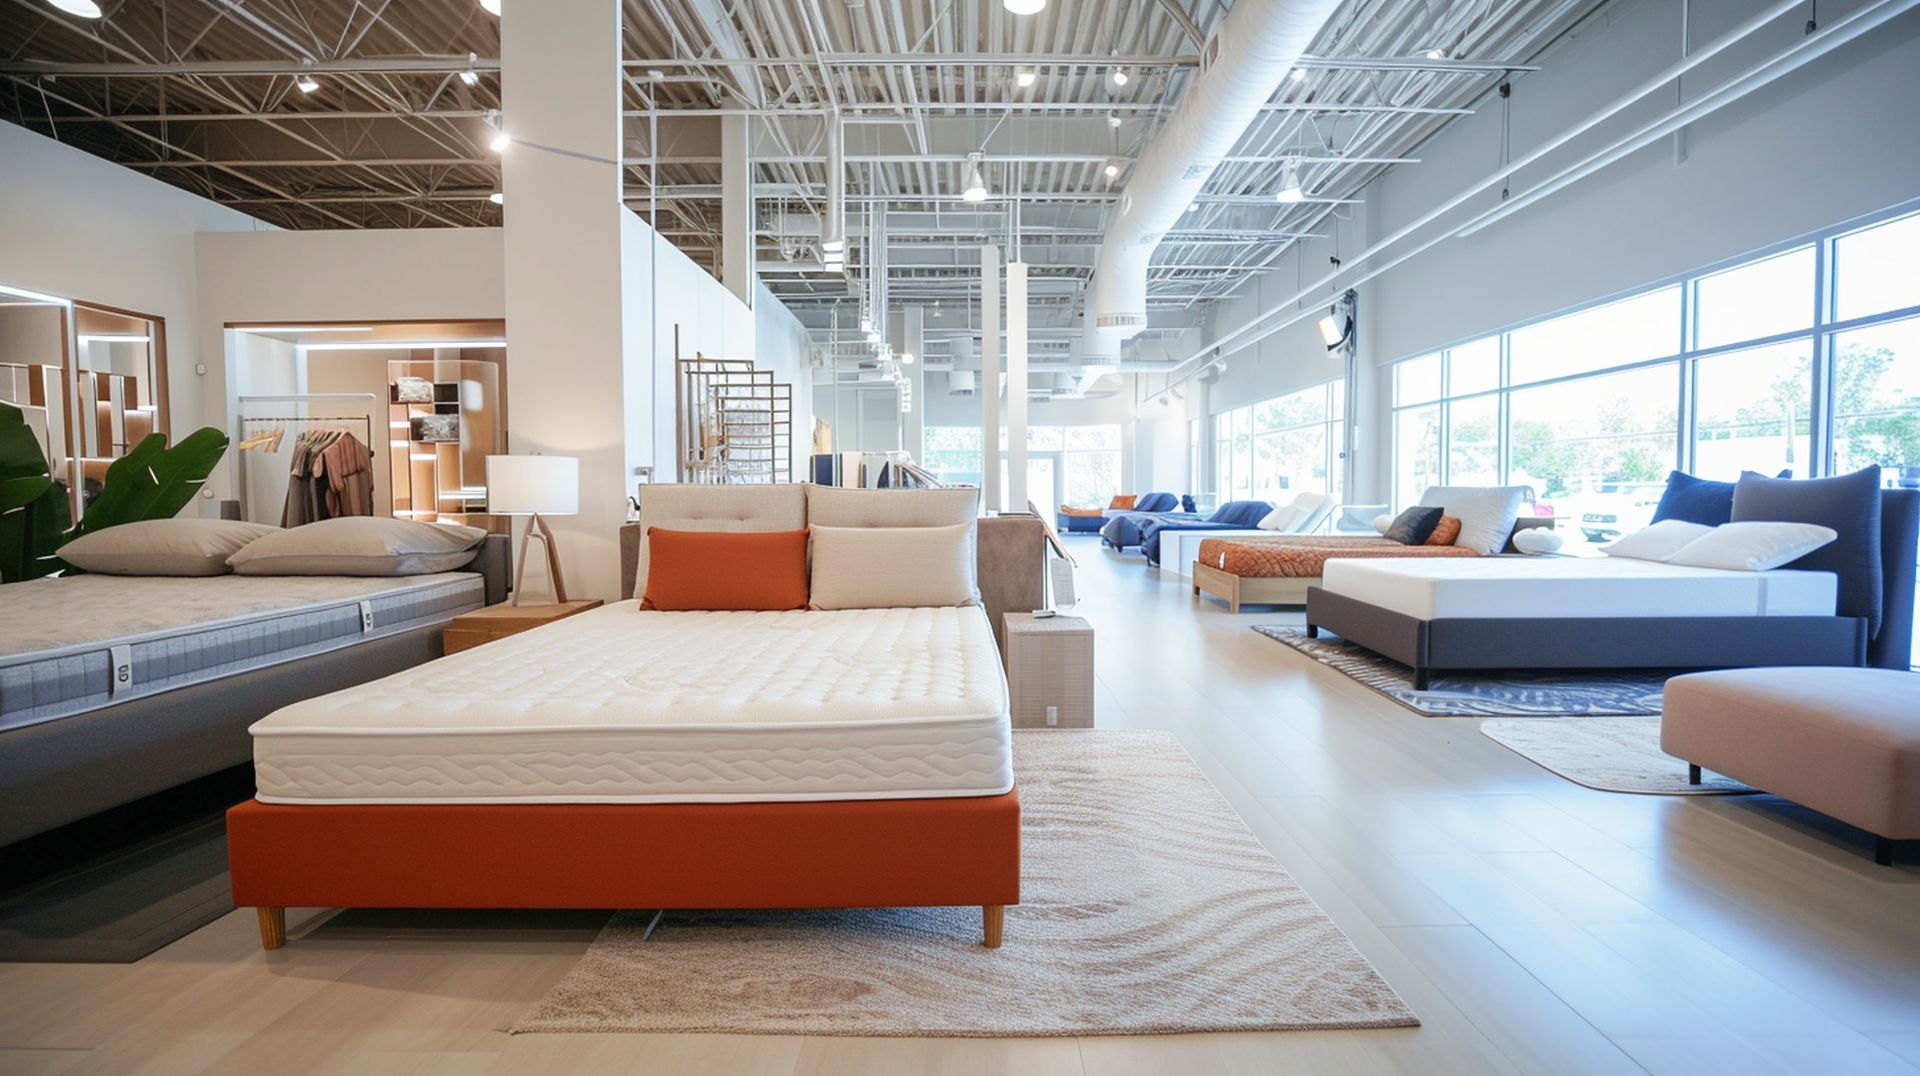 If you're looking for a new bed, mattress stores in Cedar Rapids offer the best customer and delivery service, financing, and warranties in Iowa